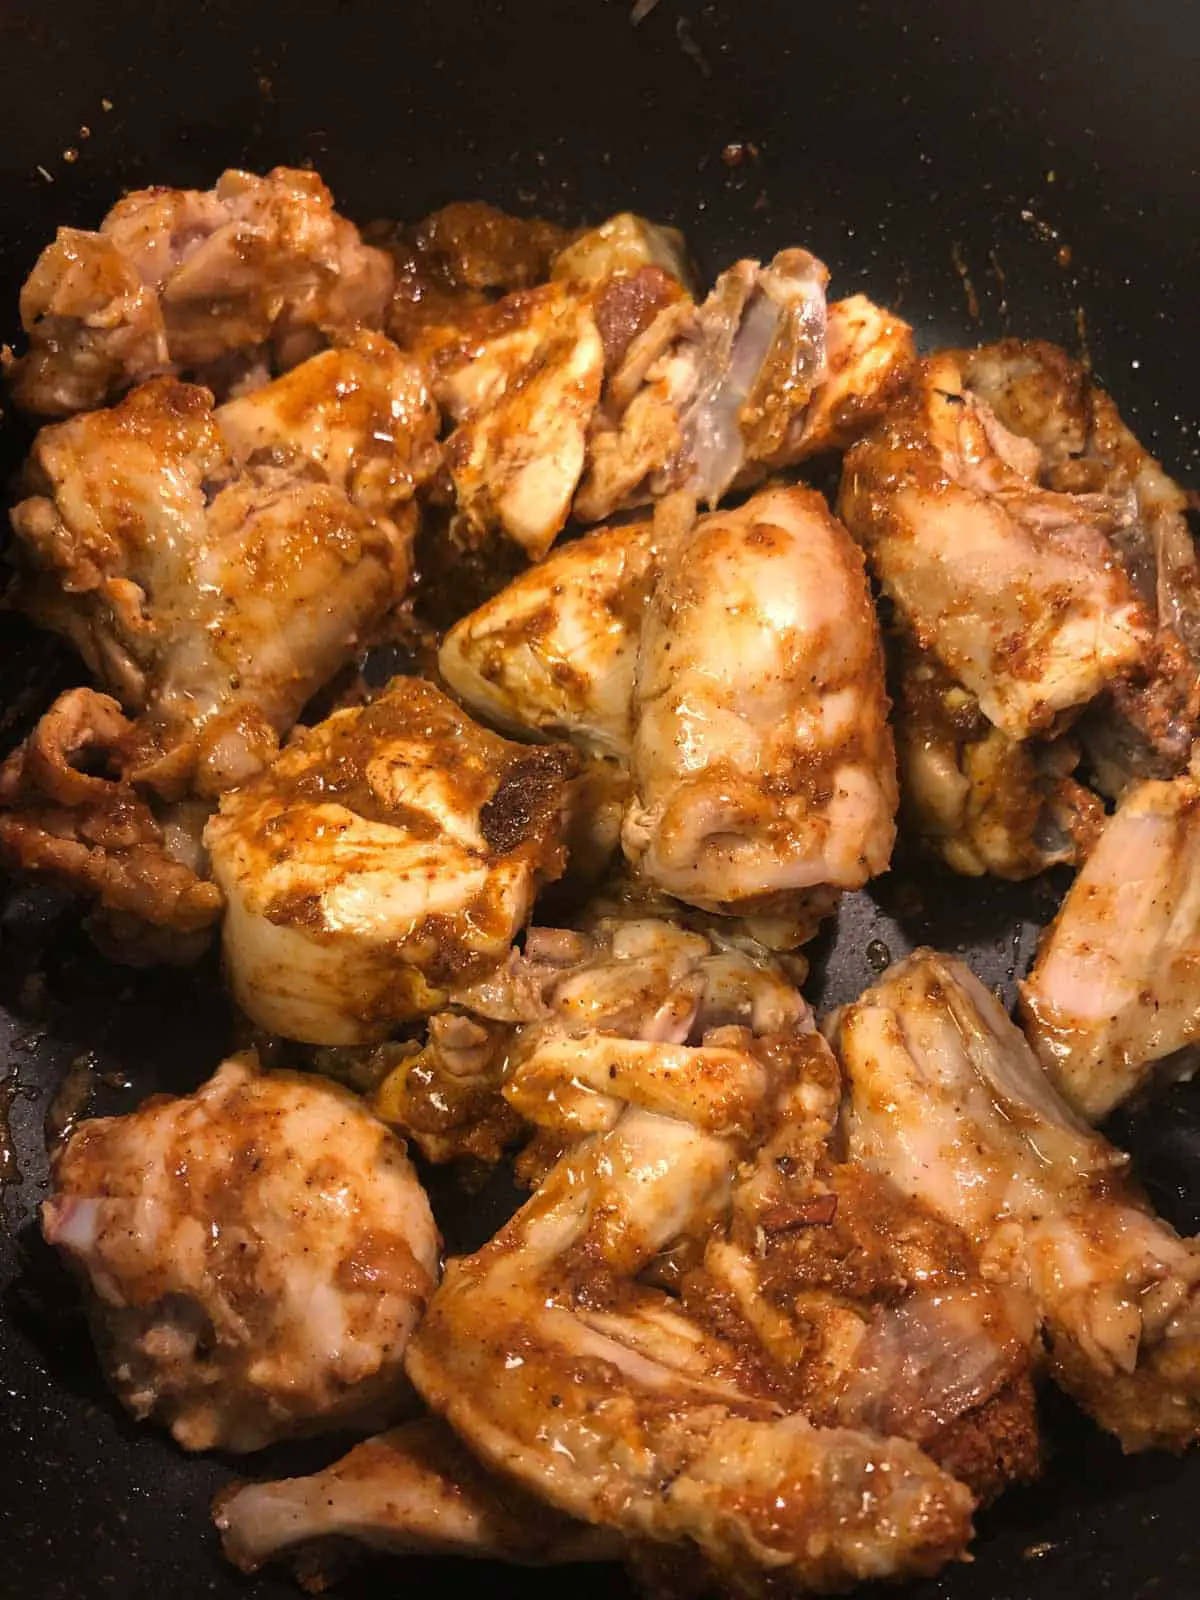 Chicken pieces coated with spices in a pot